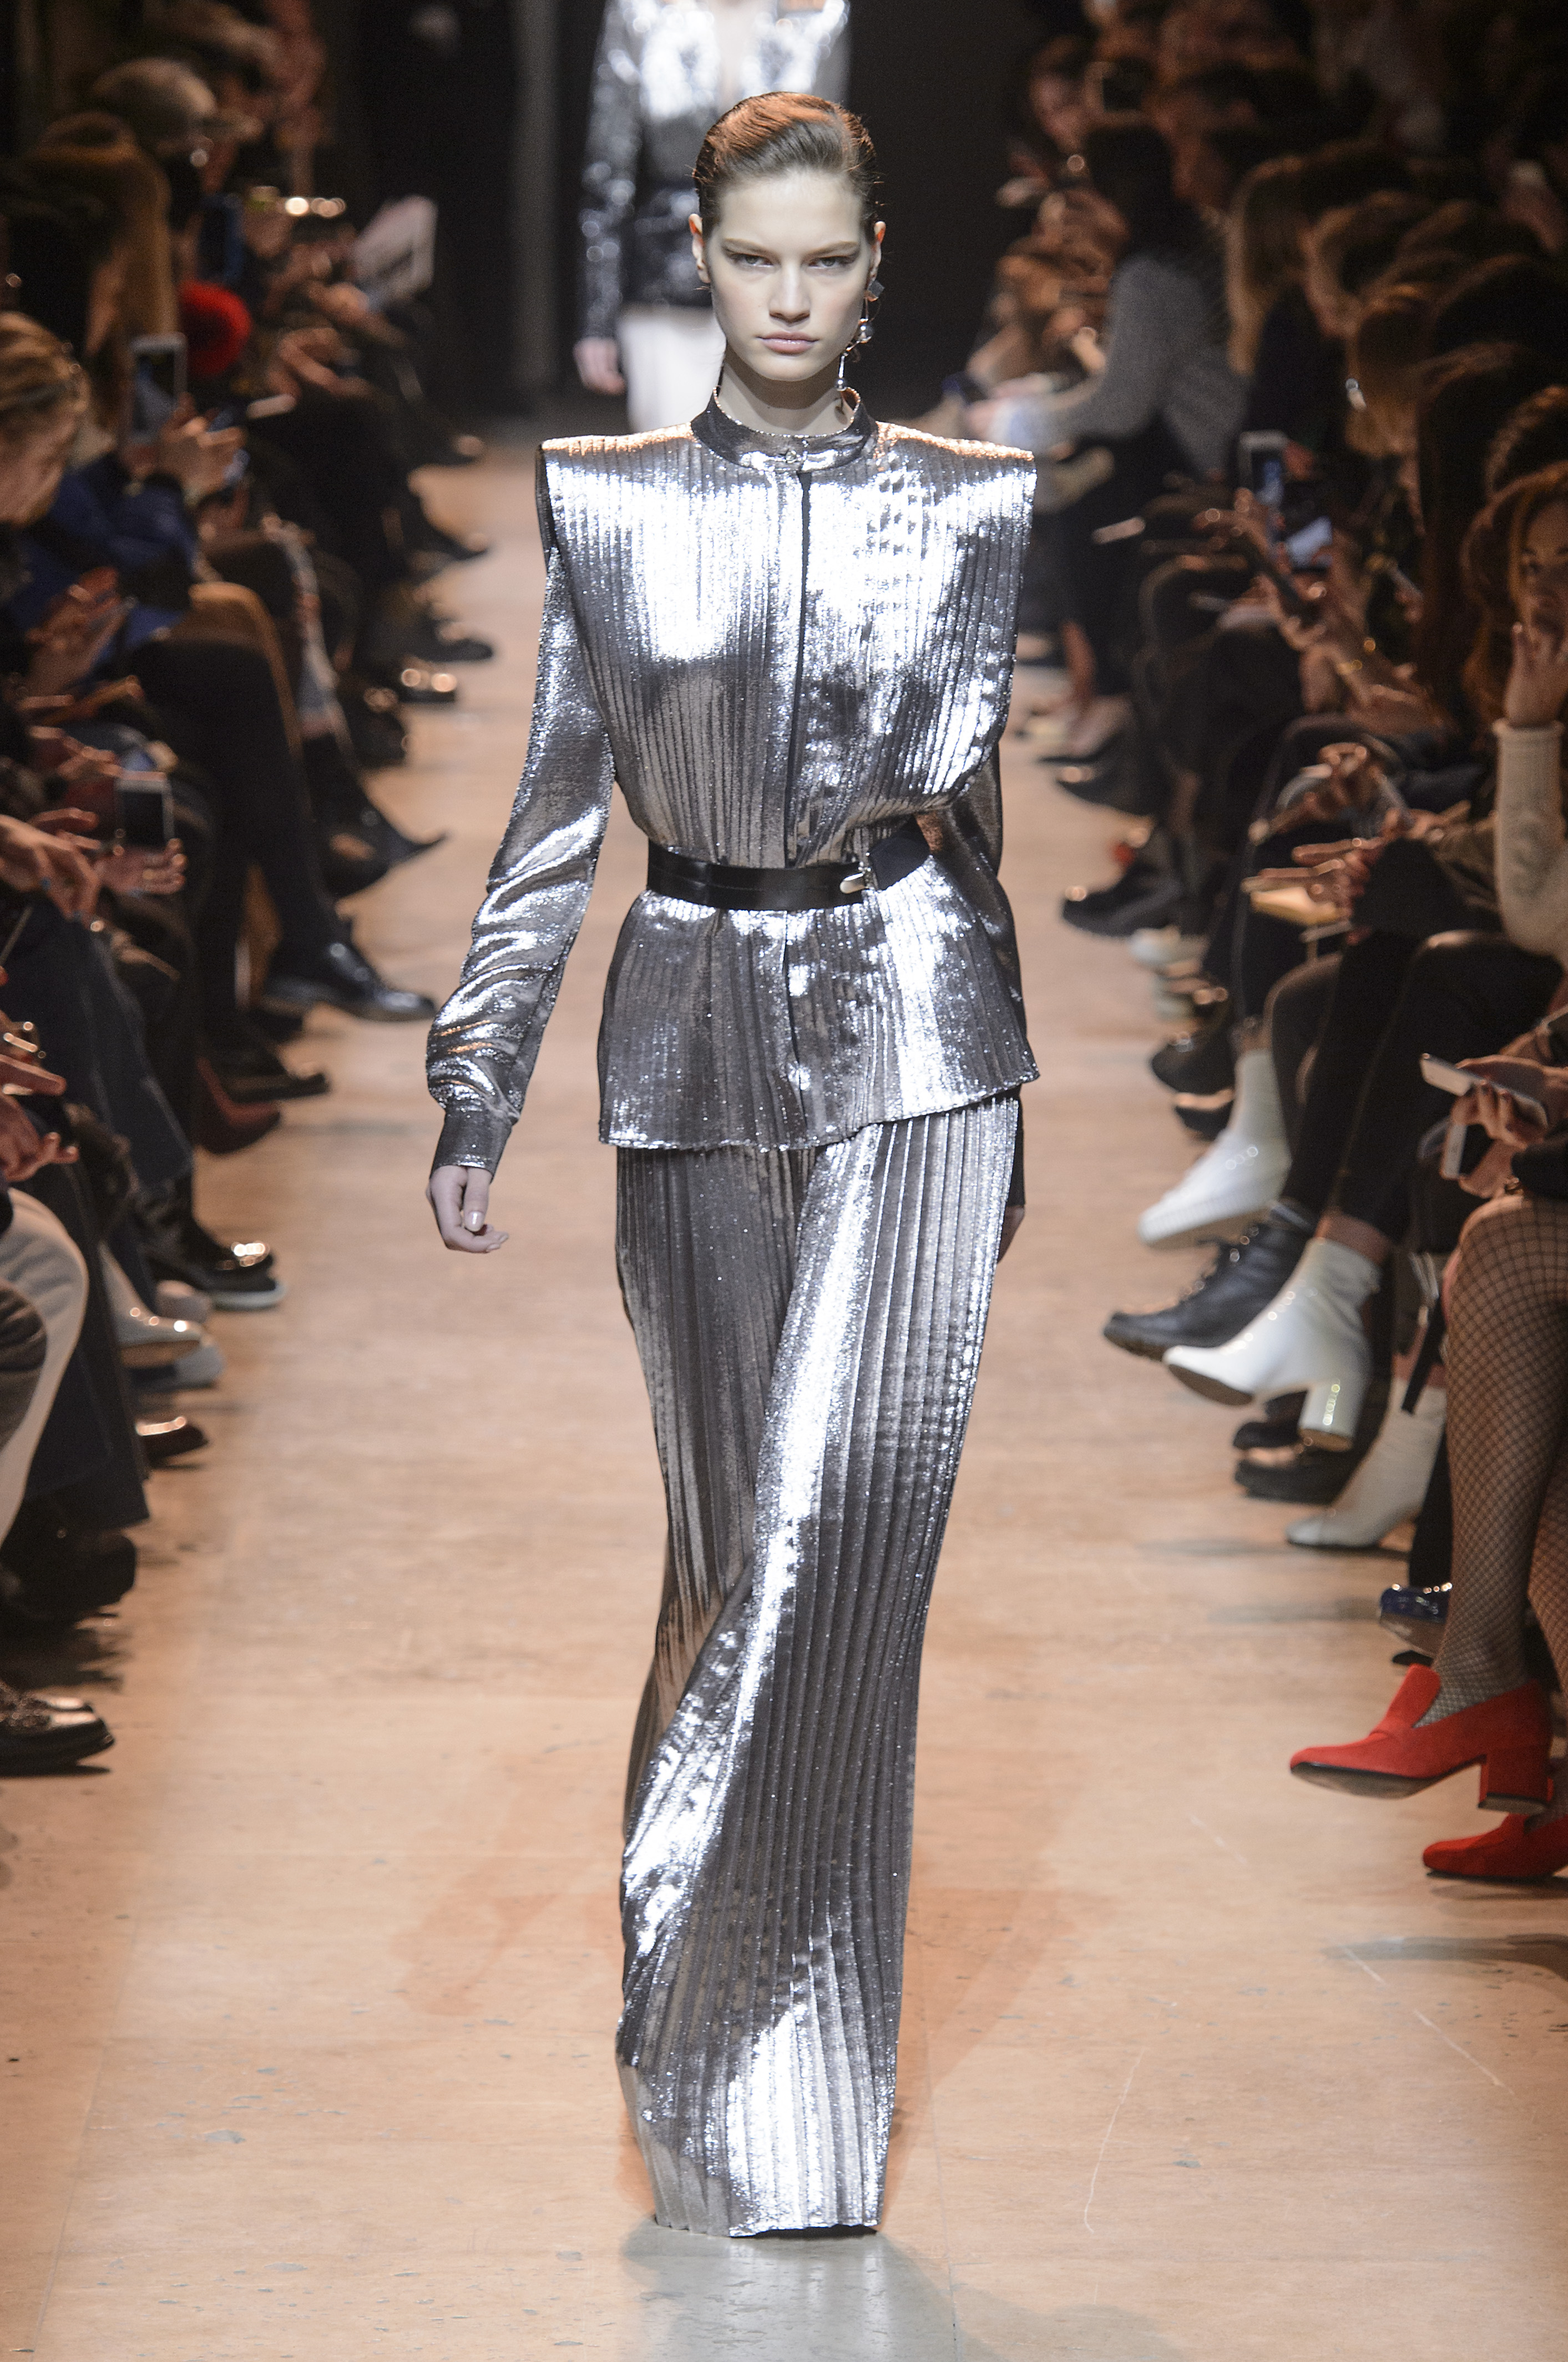 Future fashion comes from outer space